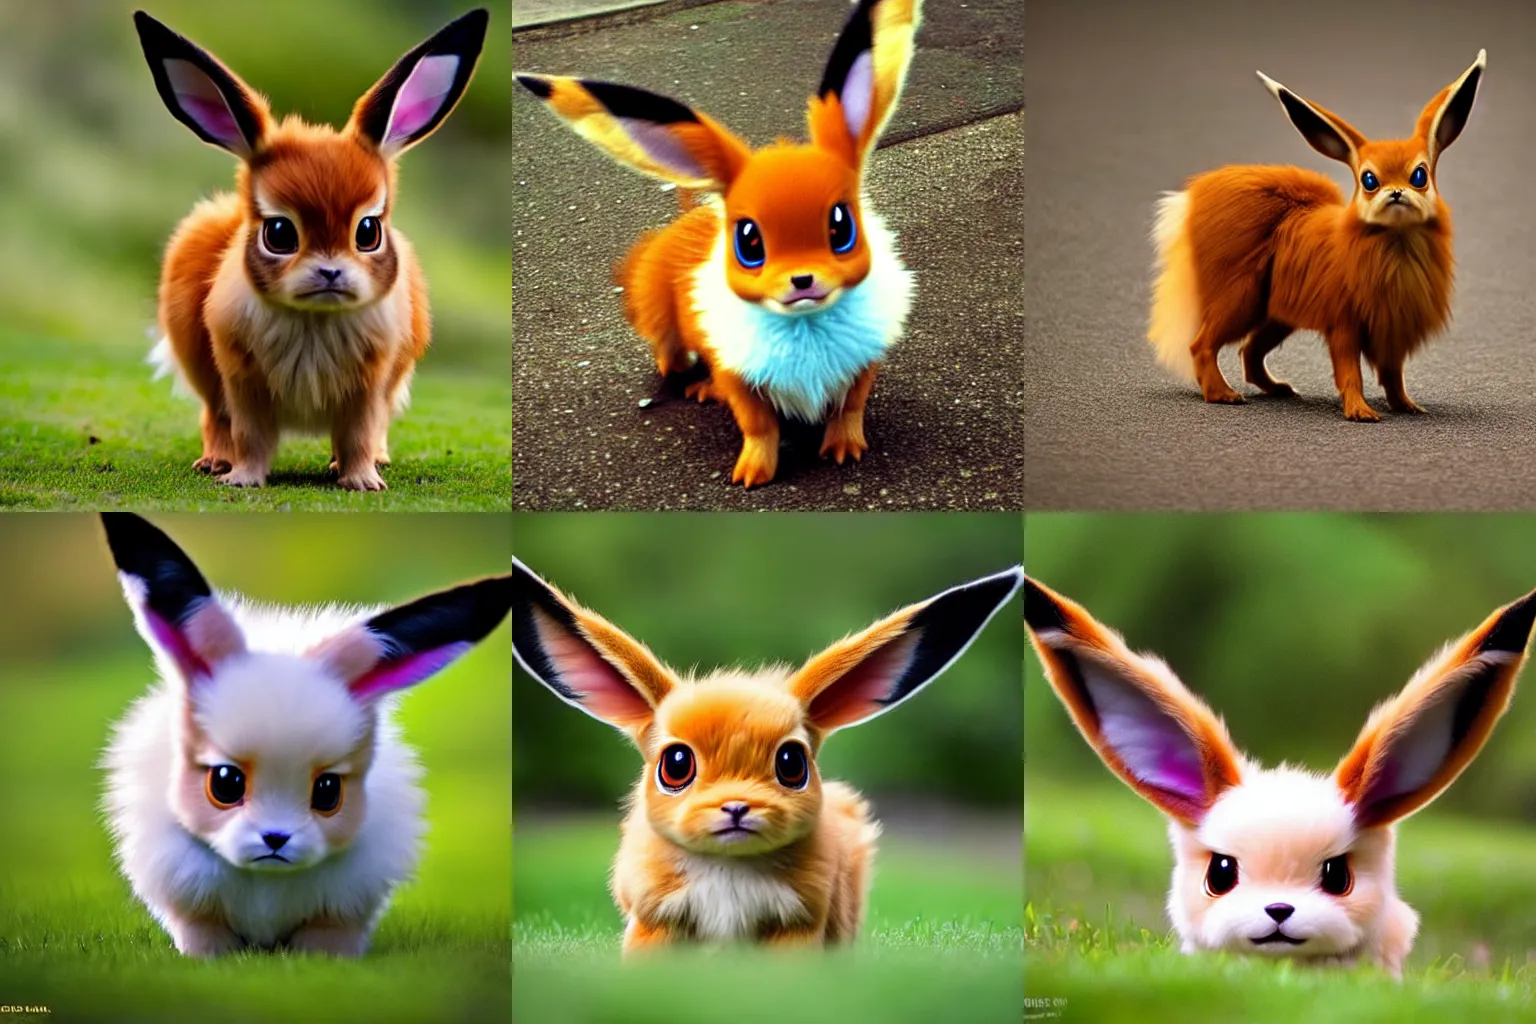 Why Eevee Is the Most Realistic Pokémon Ever